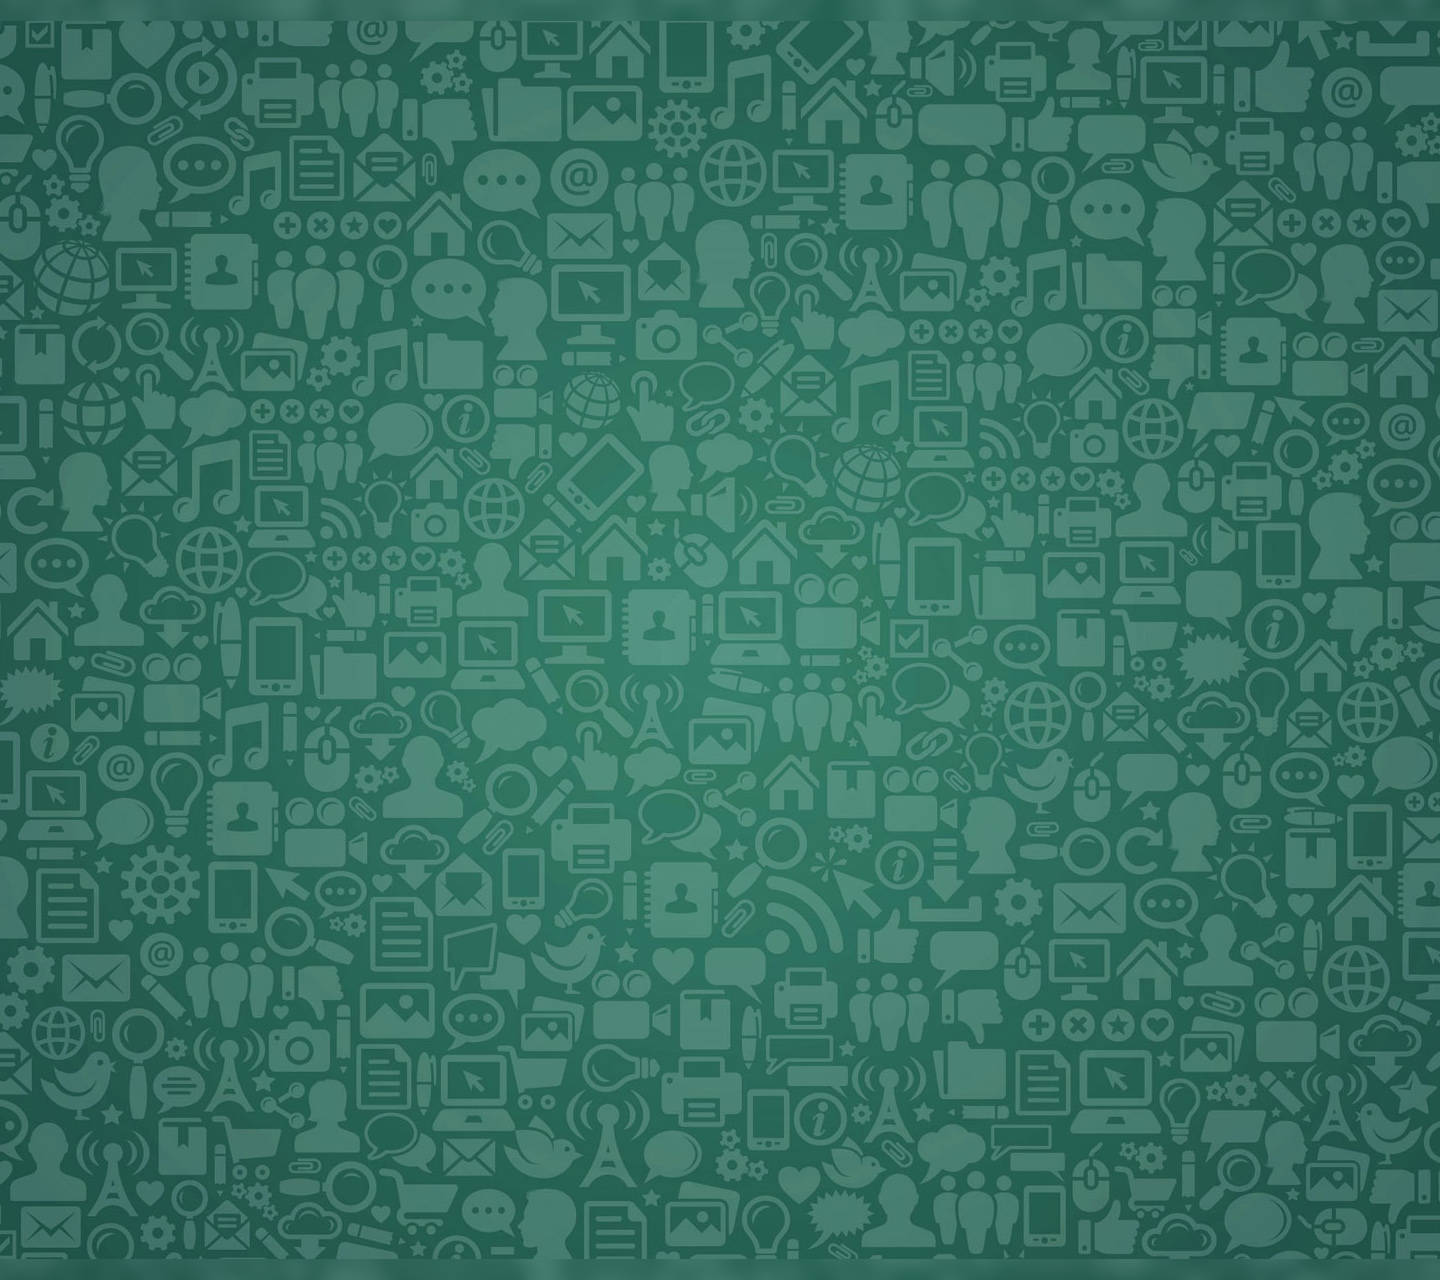 Uncover The Hidden Patterns In The Whatsapp Icon Wallpaper